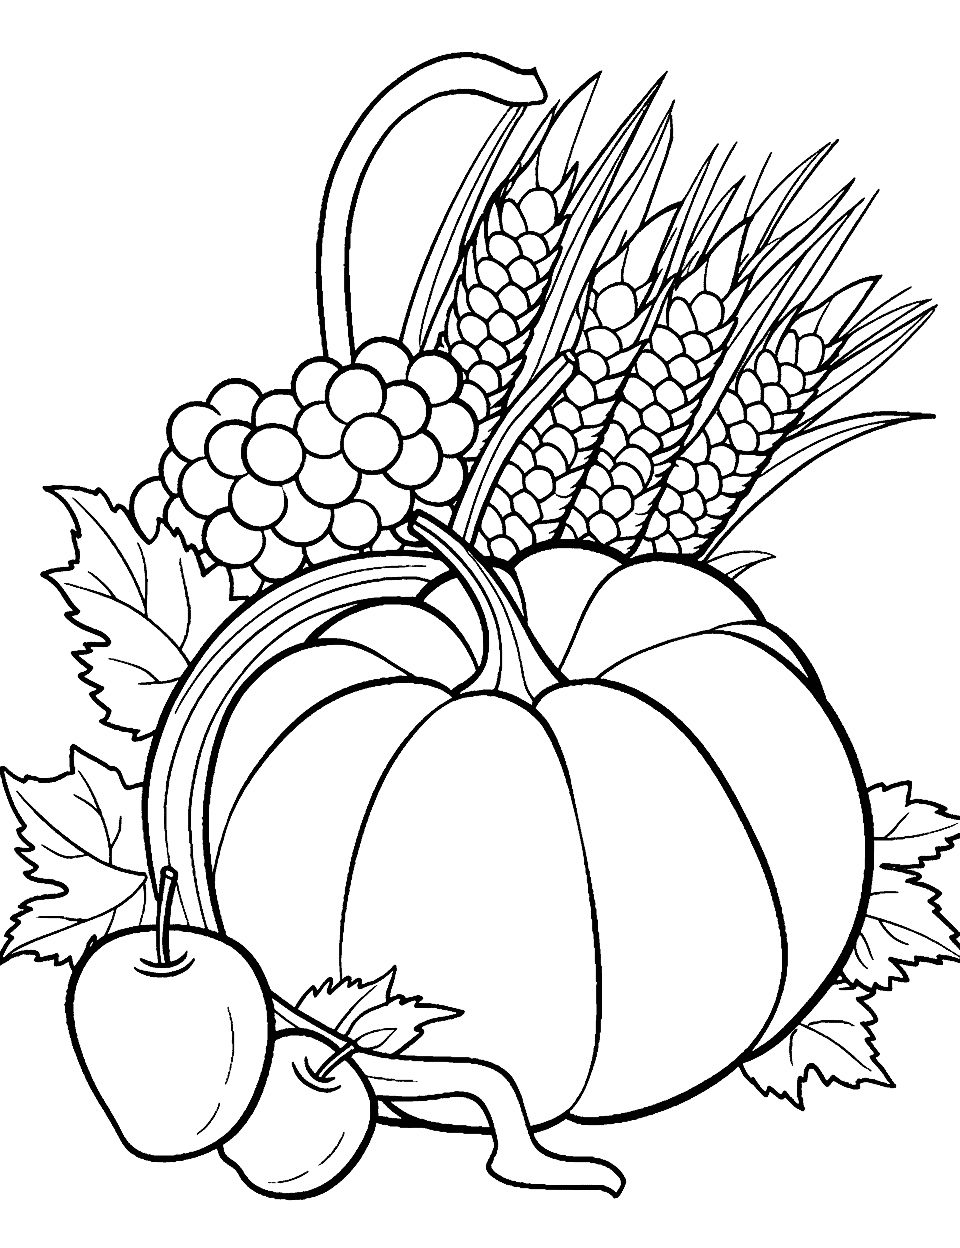 Simple Preschool Cornucopia Thanksgiving Coloring Page - A basic, easy-to-color cornucopia filled with fall harvest fruits and vegetables.